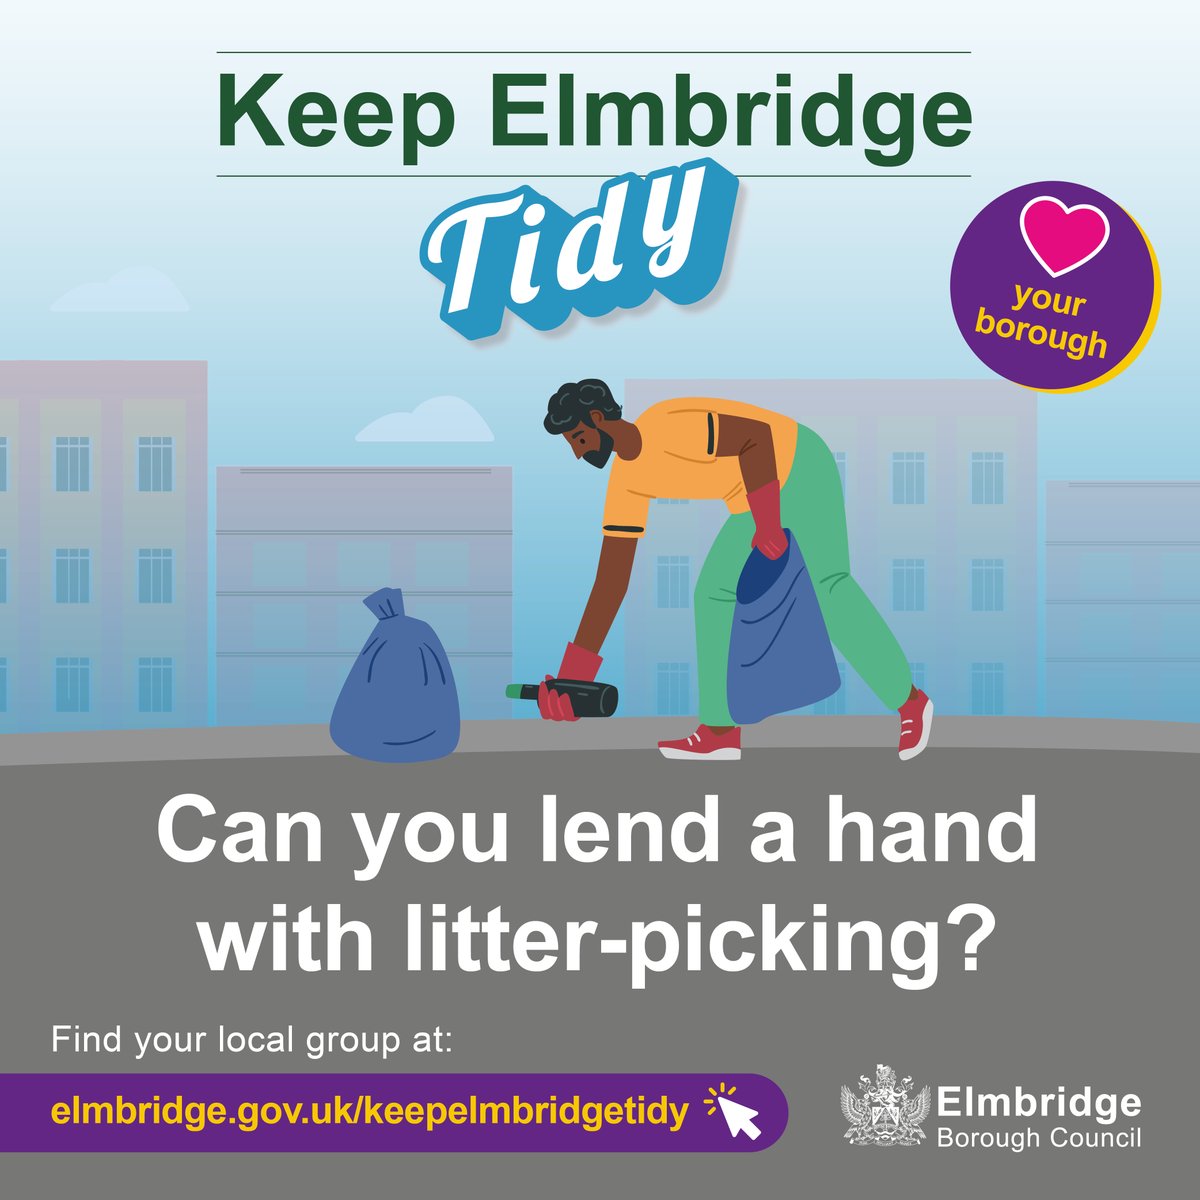 Are you fed up with seeing litter in your neighbourhood or favourite places? Why not join a local litter-picking group? You can get the equipment from us for free. Get in touch to find out more ow.ly/RwKG50QYSm1 #KeepElmbridgeTidy